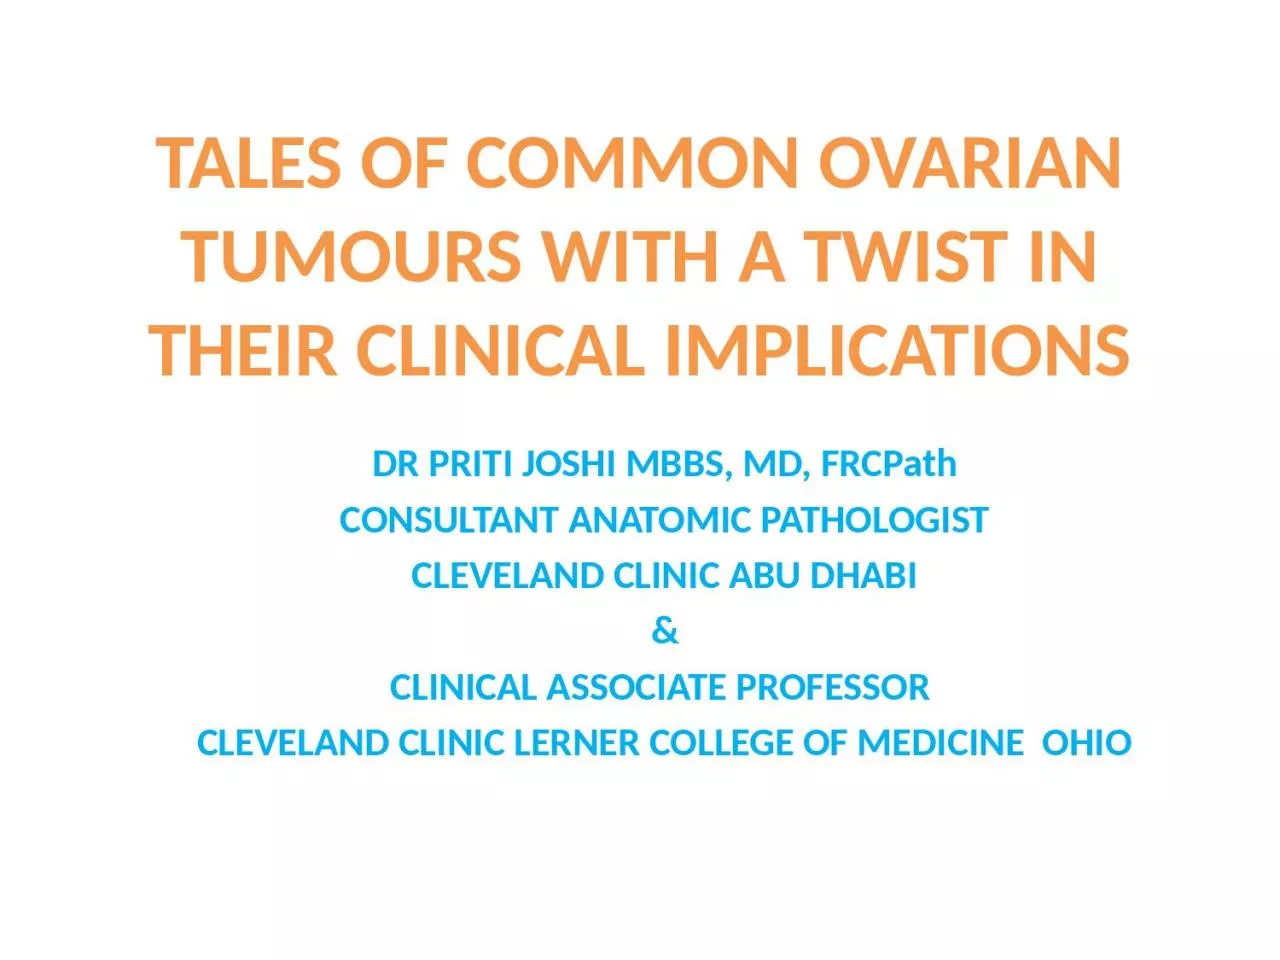 TALES OF COMMON OVARIAN TUMOURS WITH A TWIST IN THEIR CLINICAL IMPLICATIONS